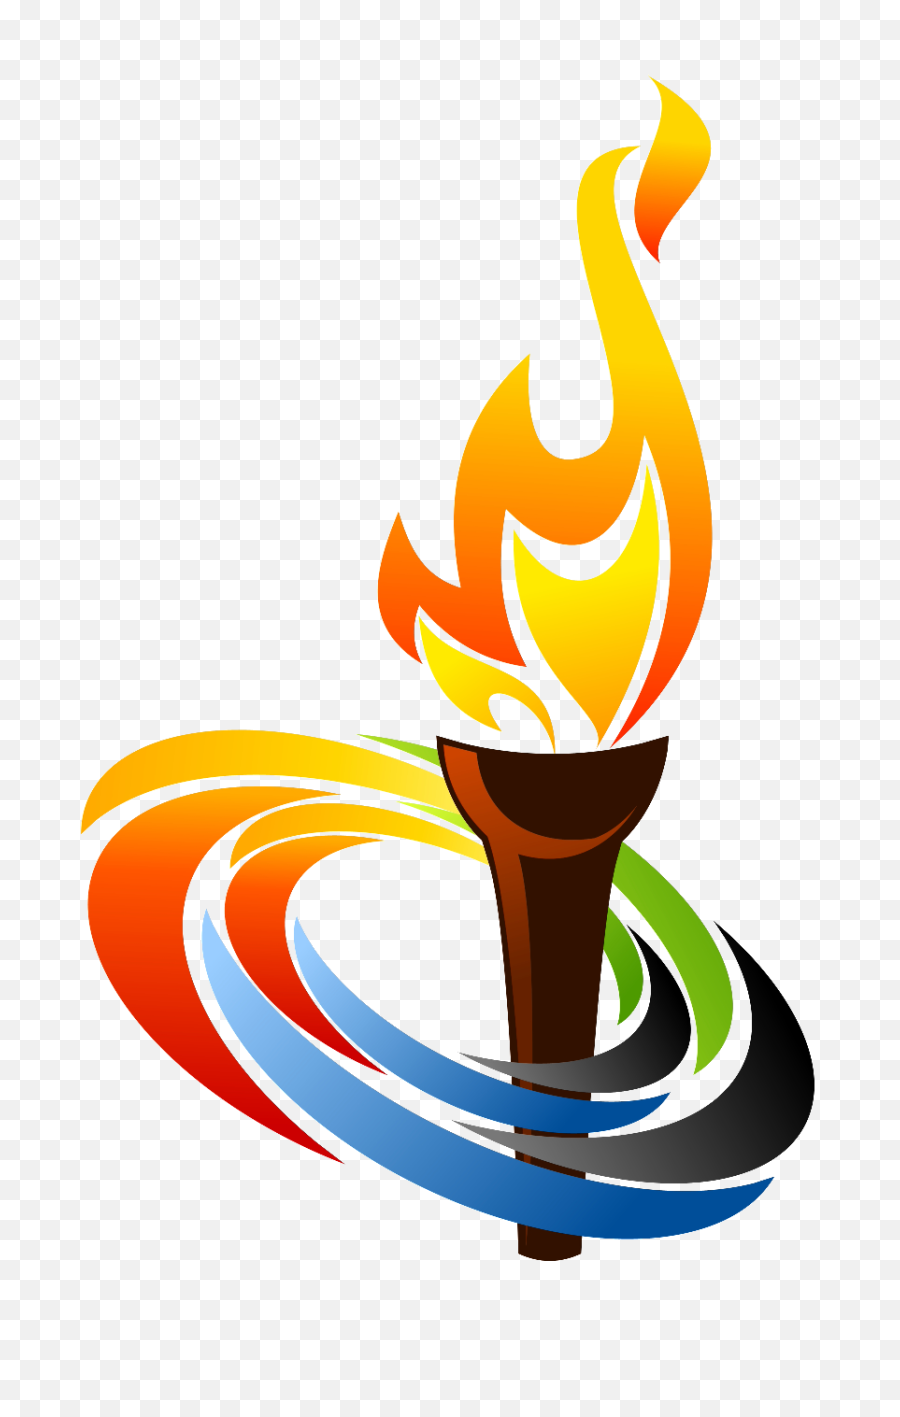 Pics For Torch Flame Png Clipart - Clip Art Olympic Torch,Torch Png